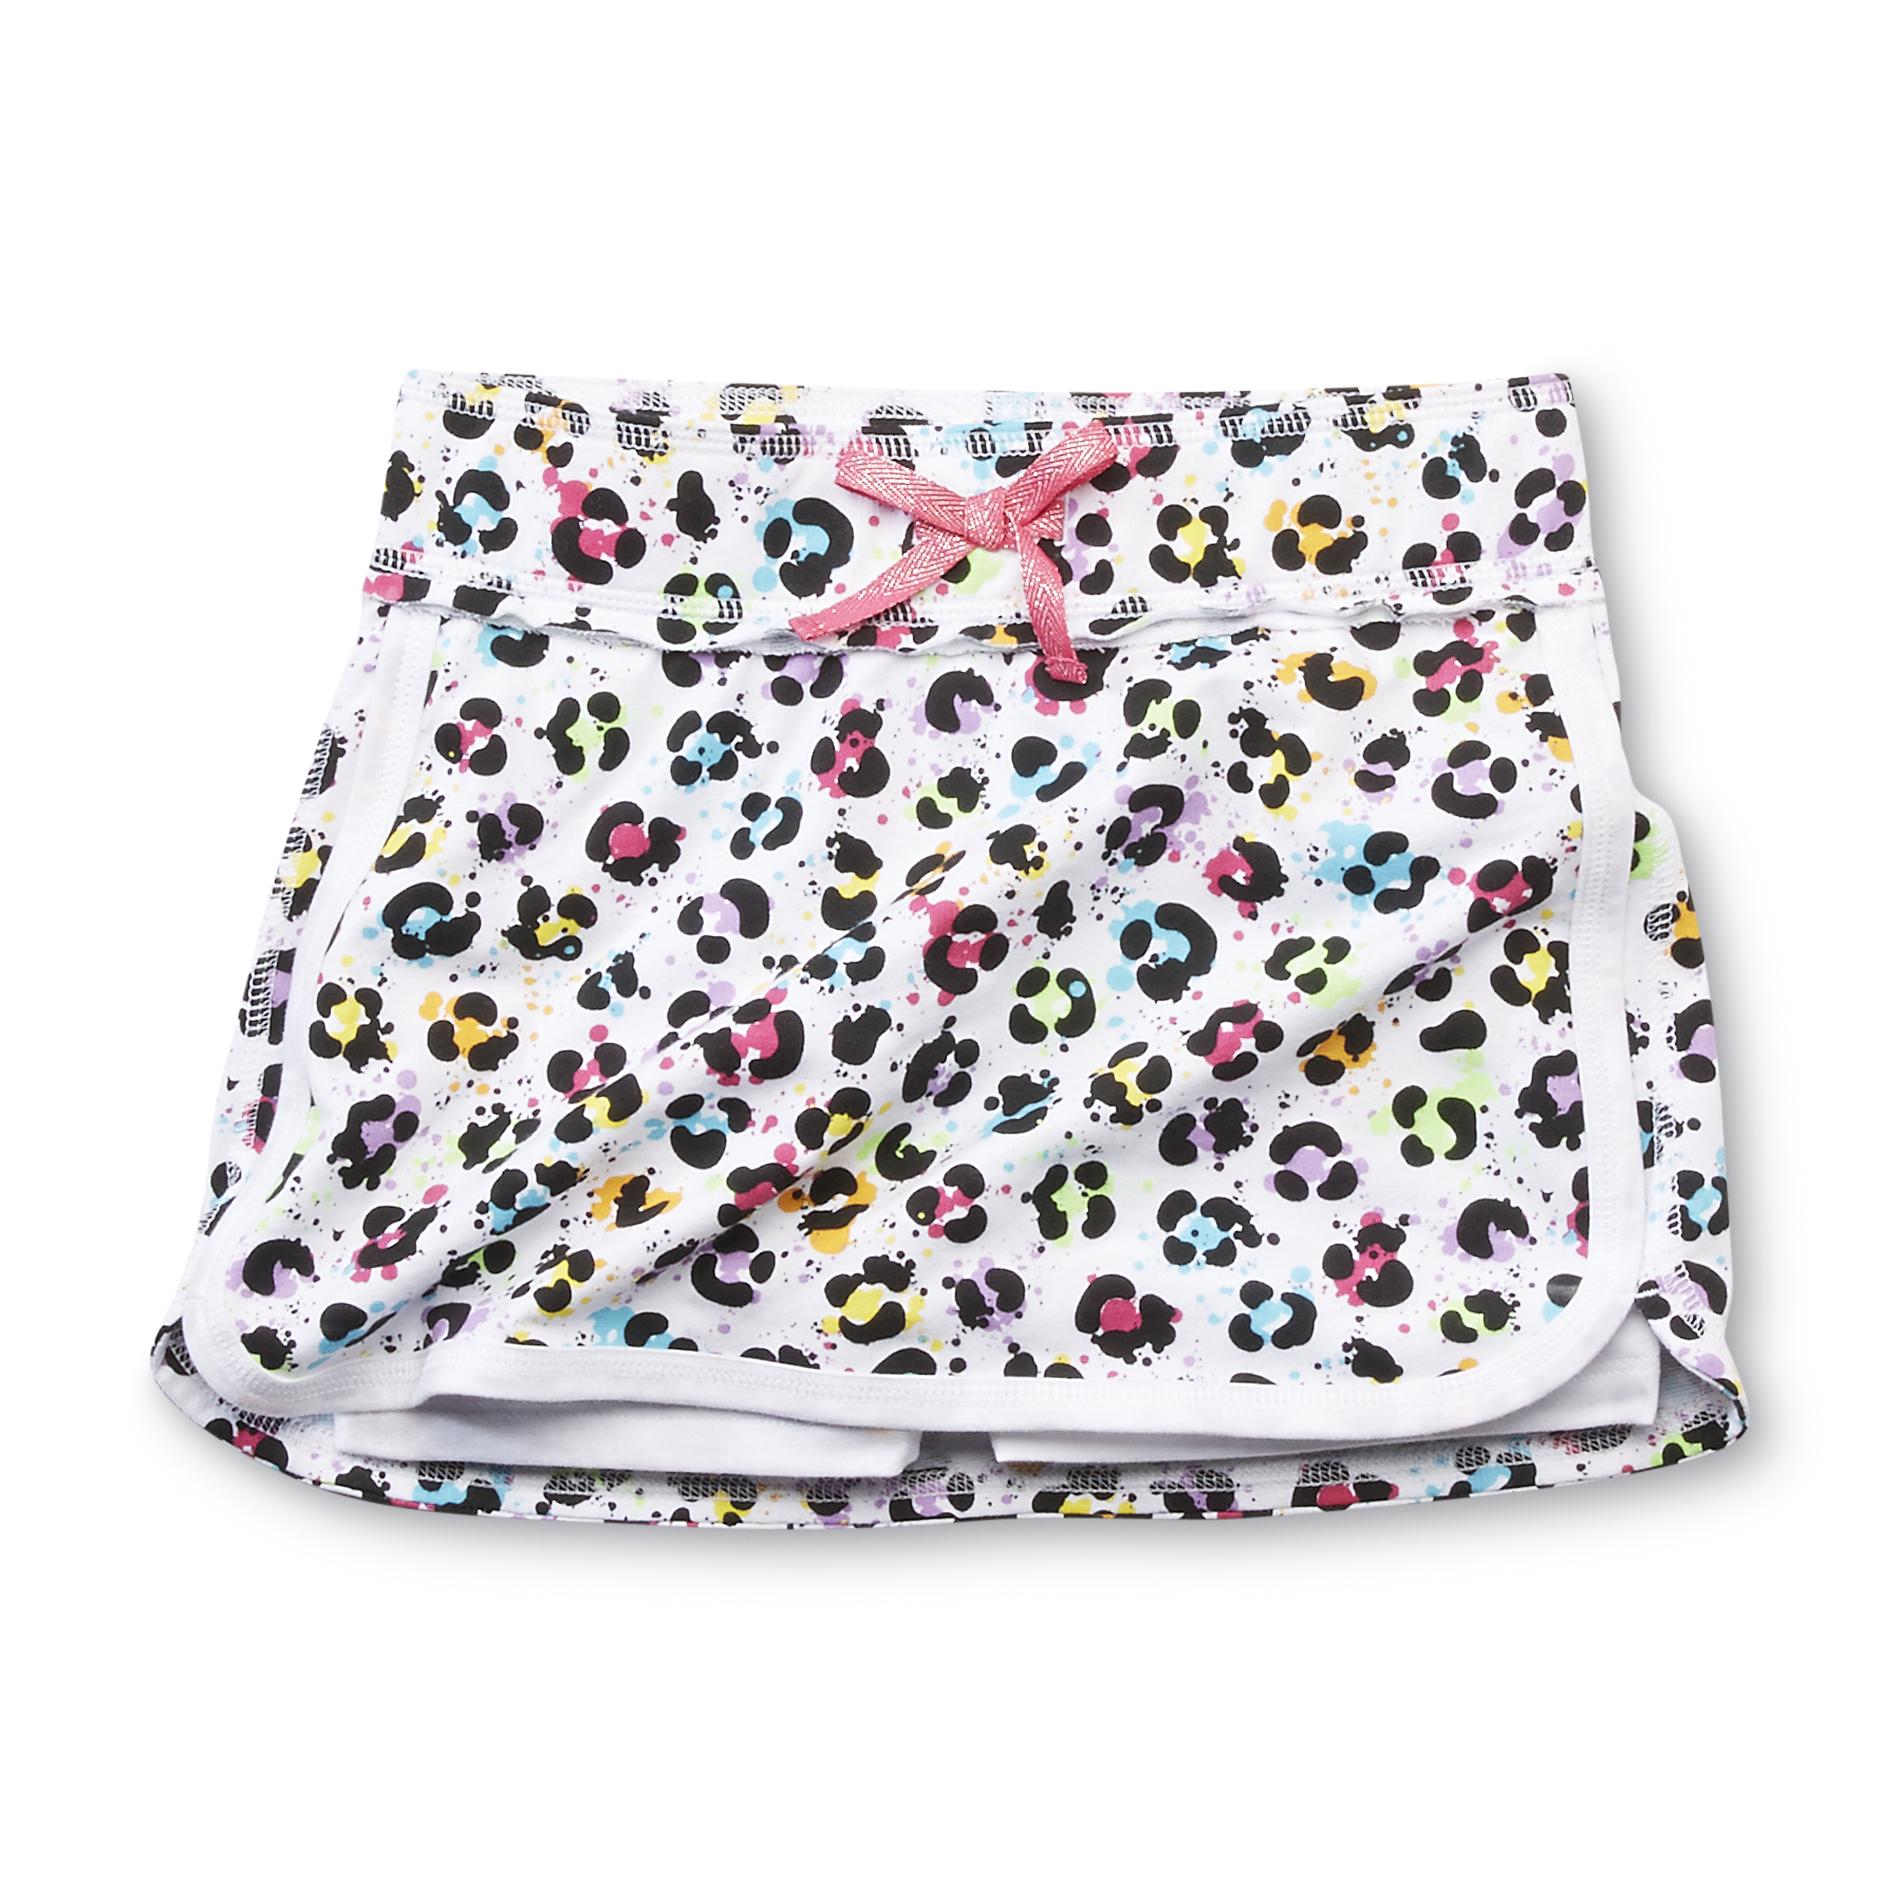 Basic Editions Girl's Scooter Skirt - Leopard Print